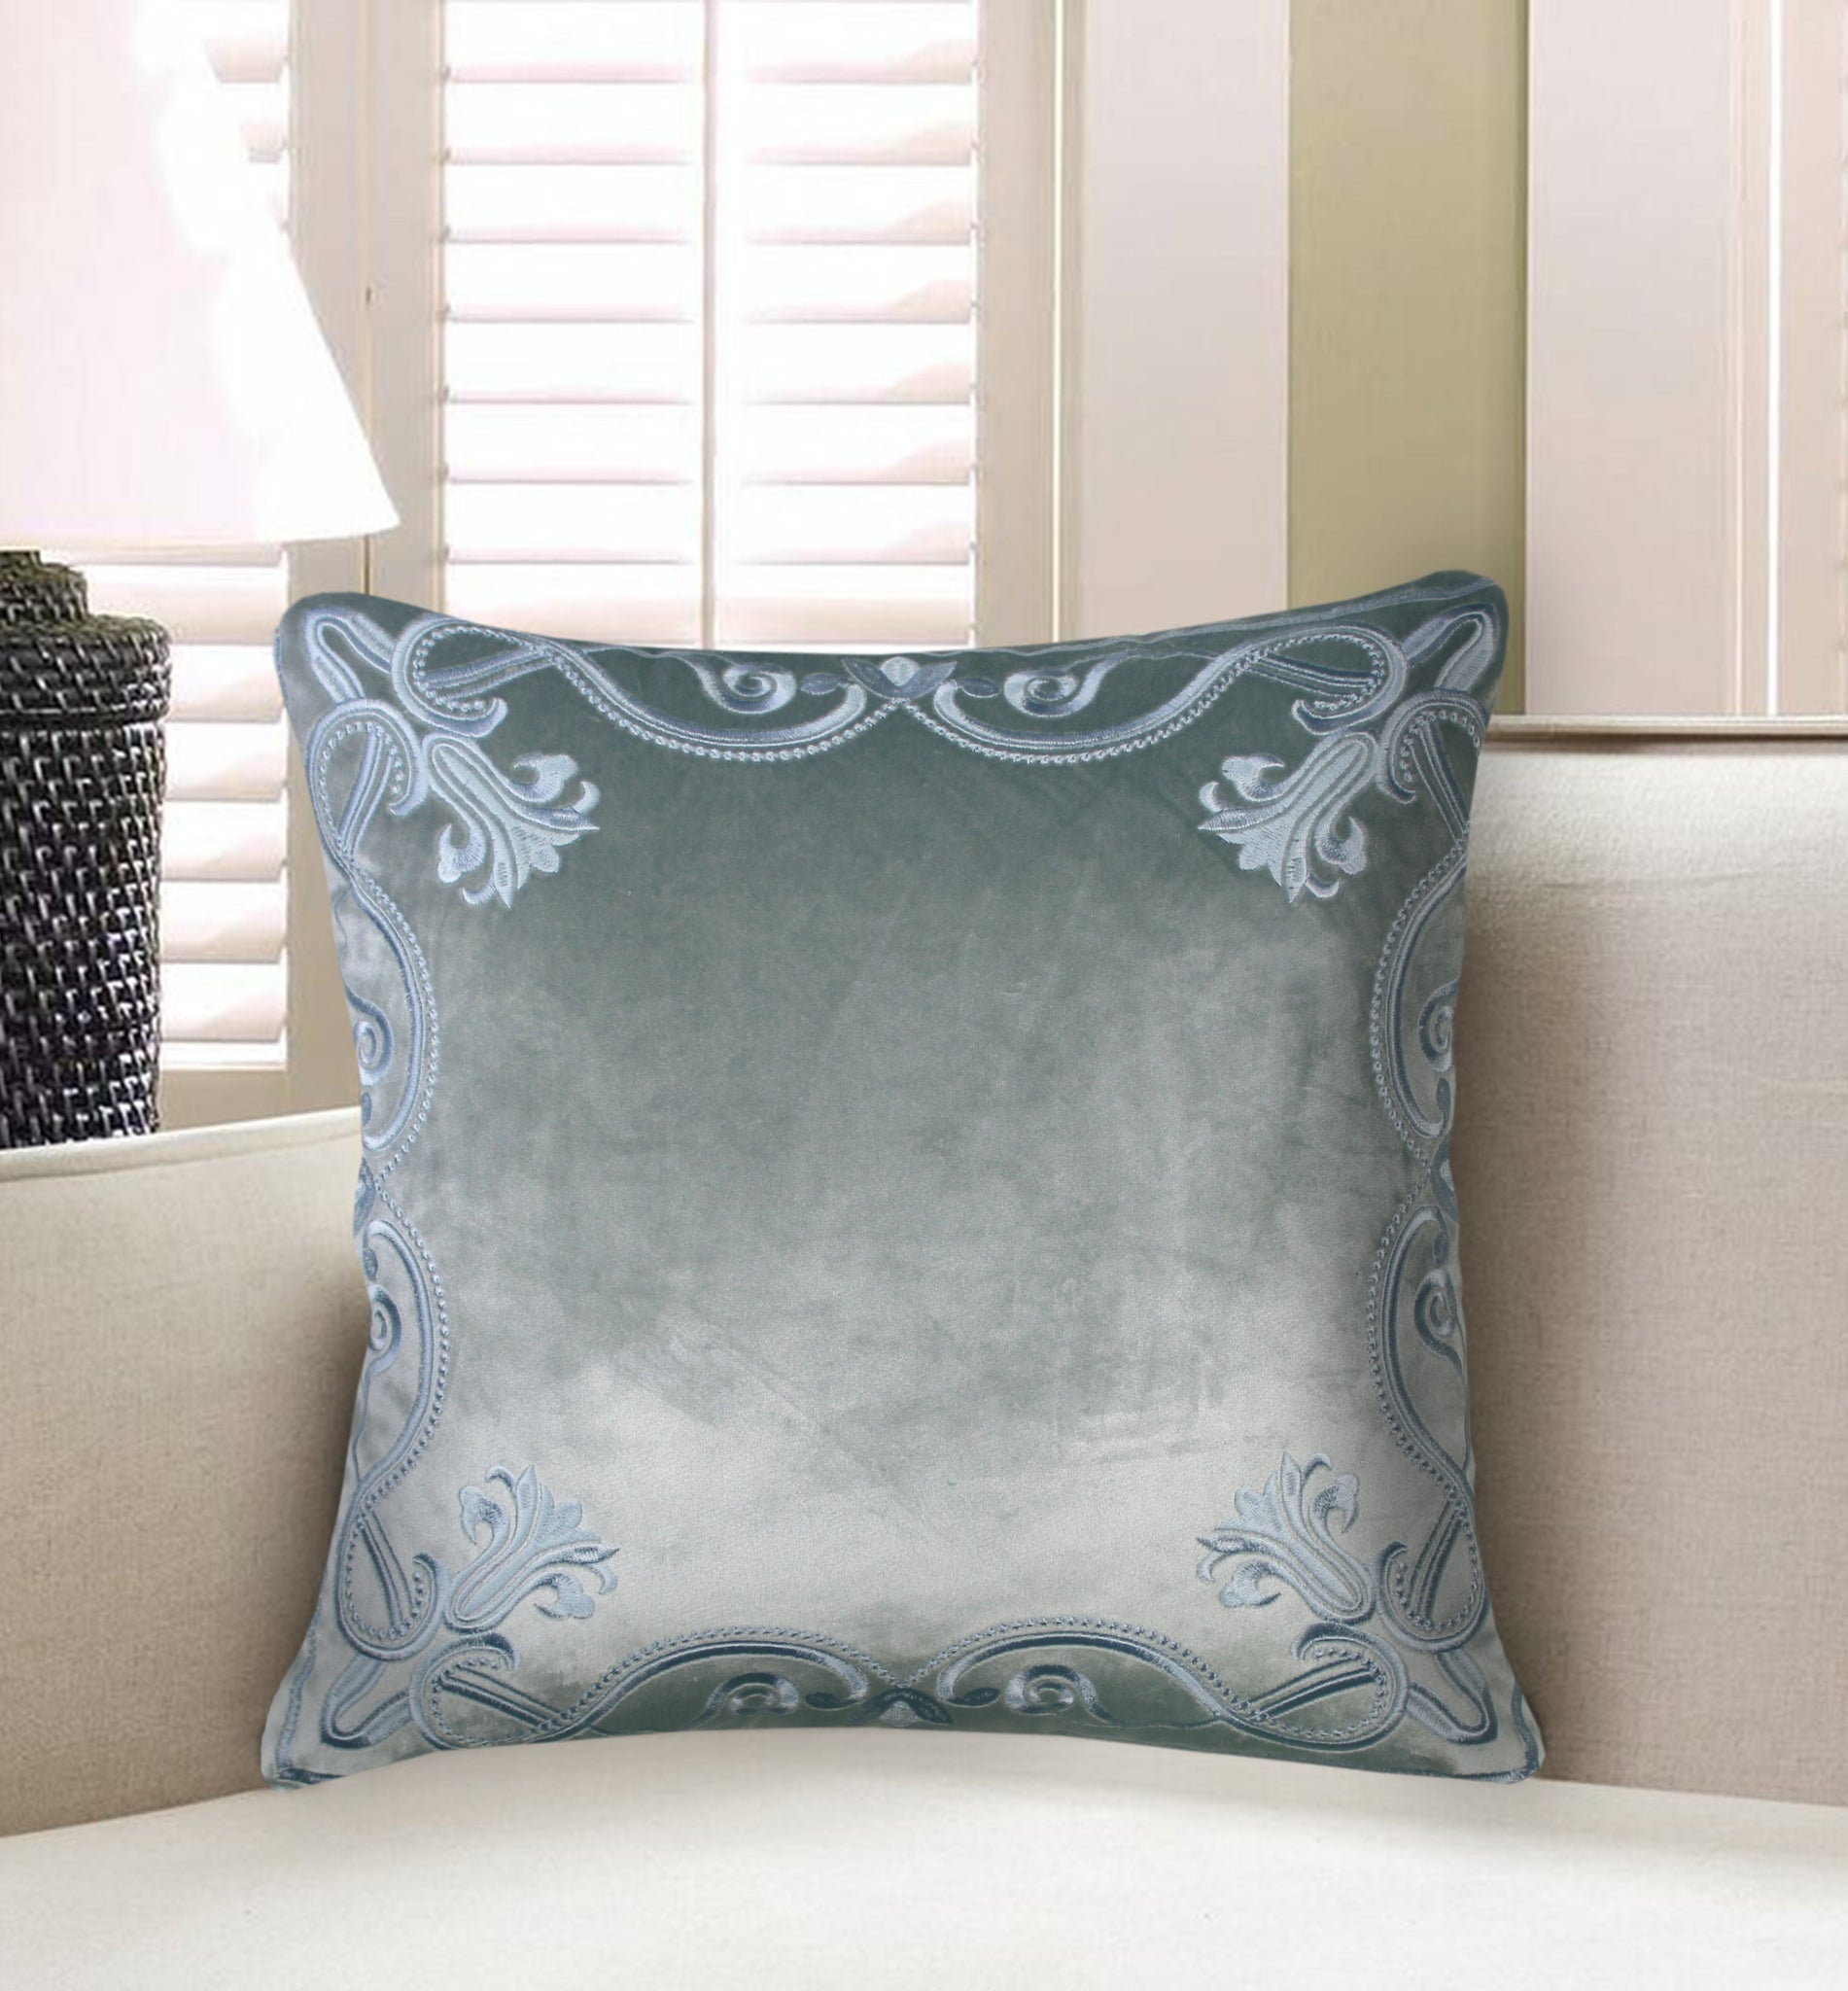 Gray Luxury Embroidered Baroque Cushion Covers Velvet Pillow Case Home Decorative Sofa Throw Pillows